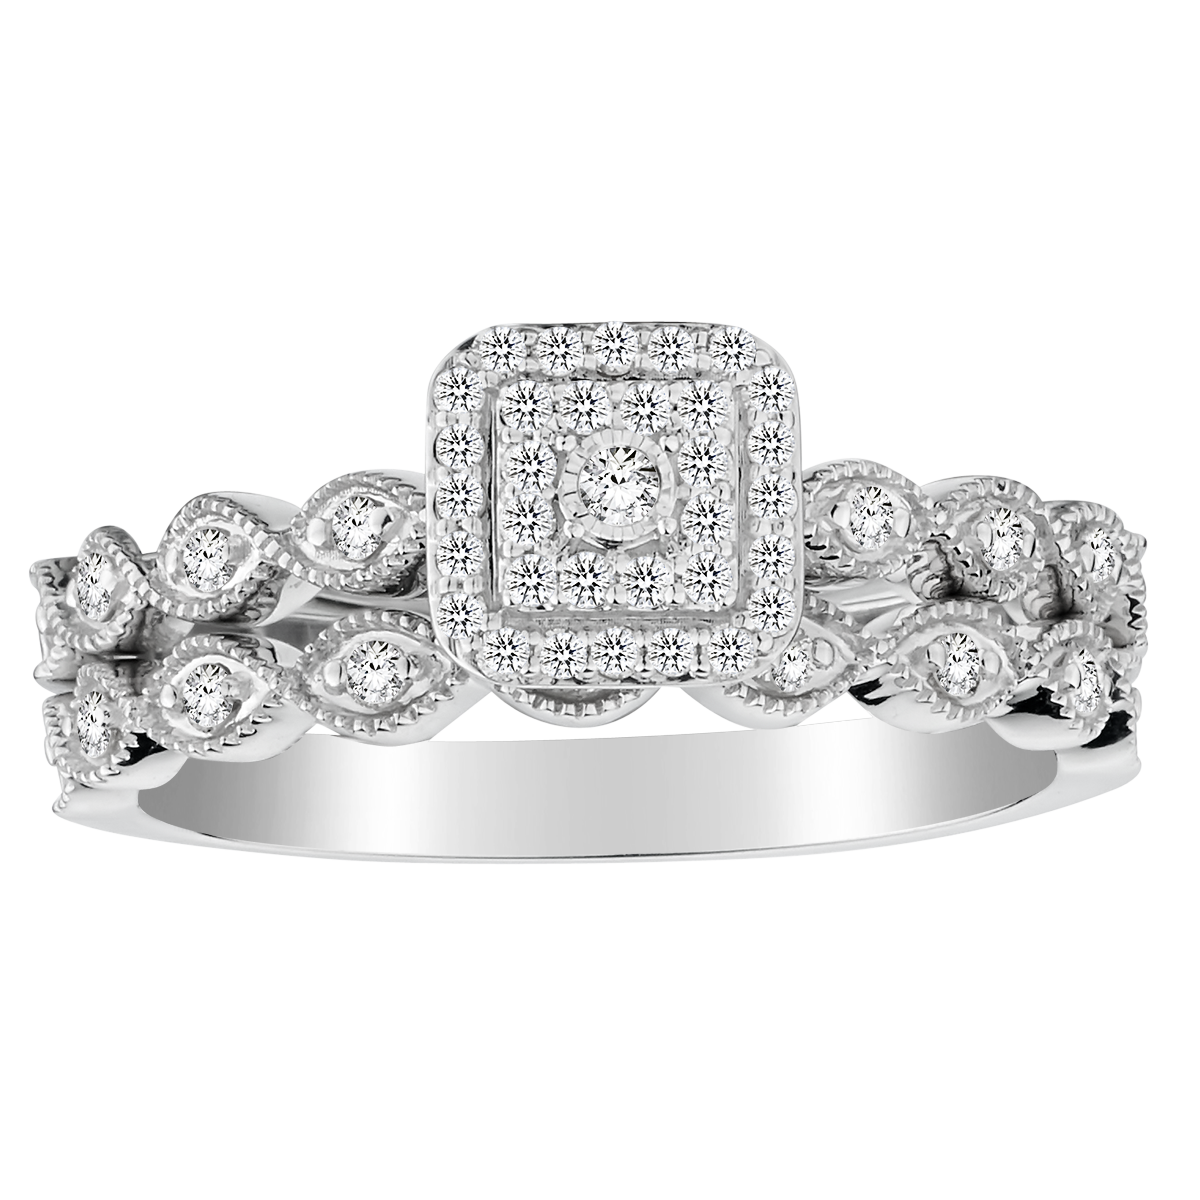 .26 carat of Diamonds Ring Set,  10kt White Gold. Griffin Jewellery Designs